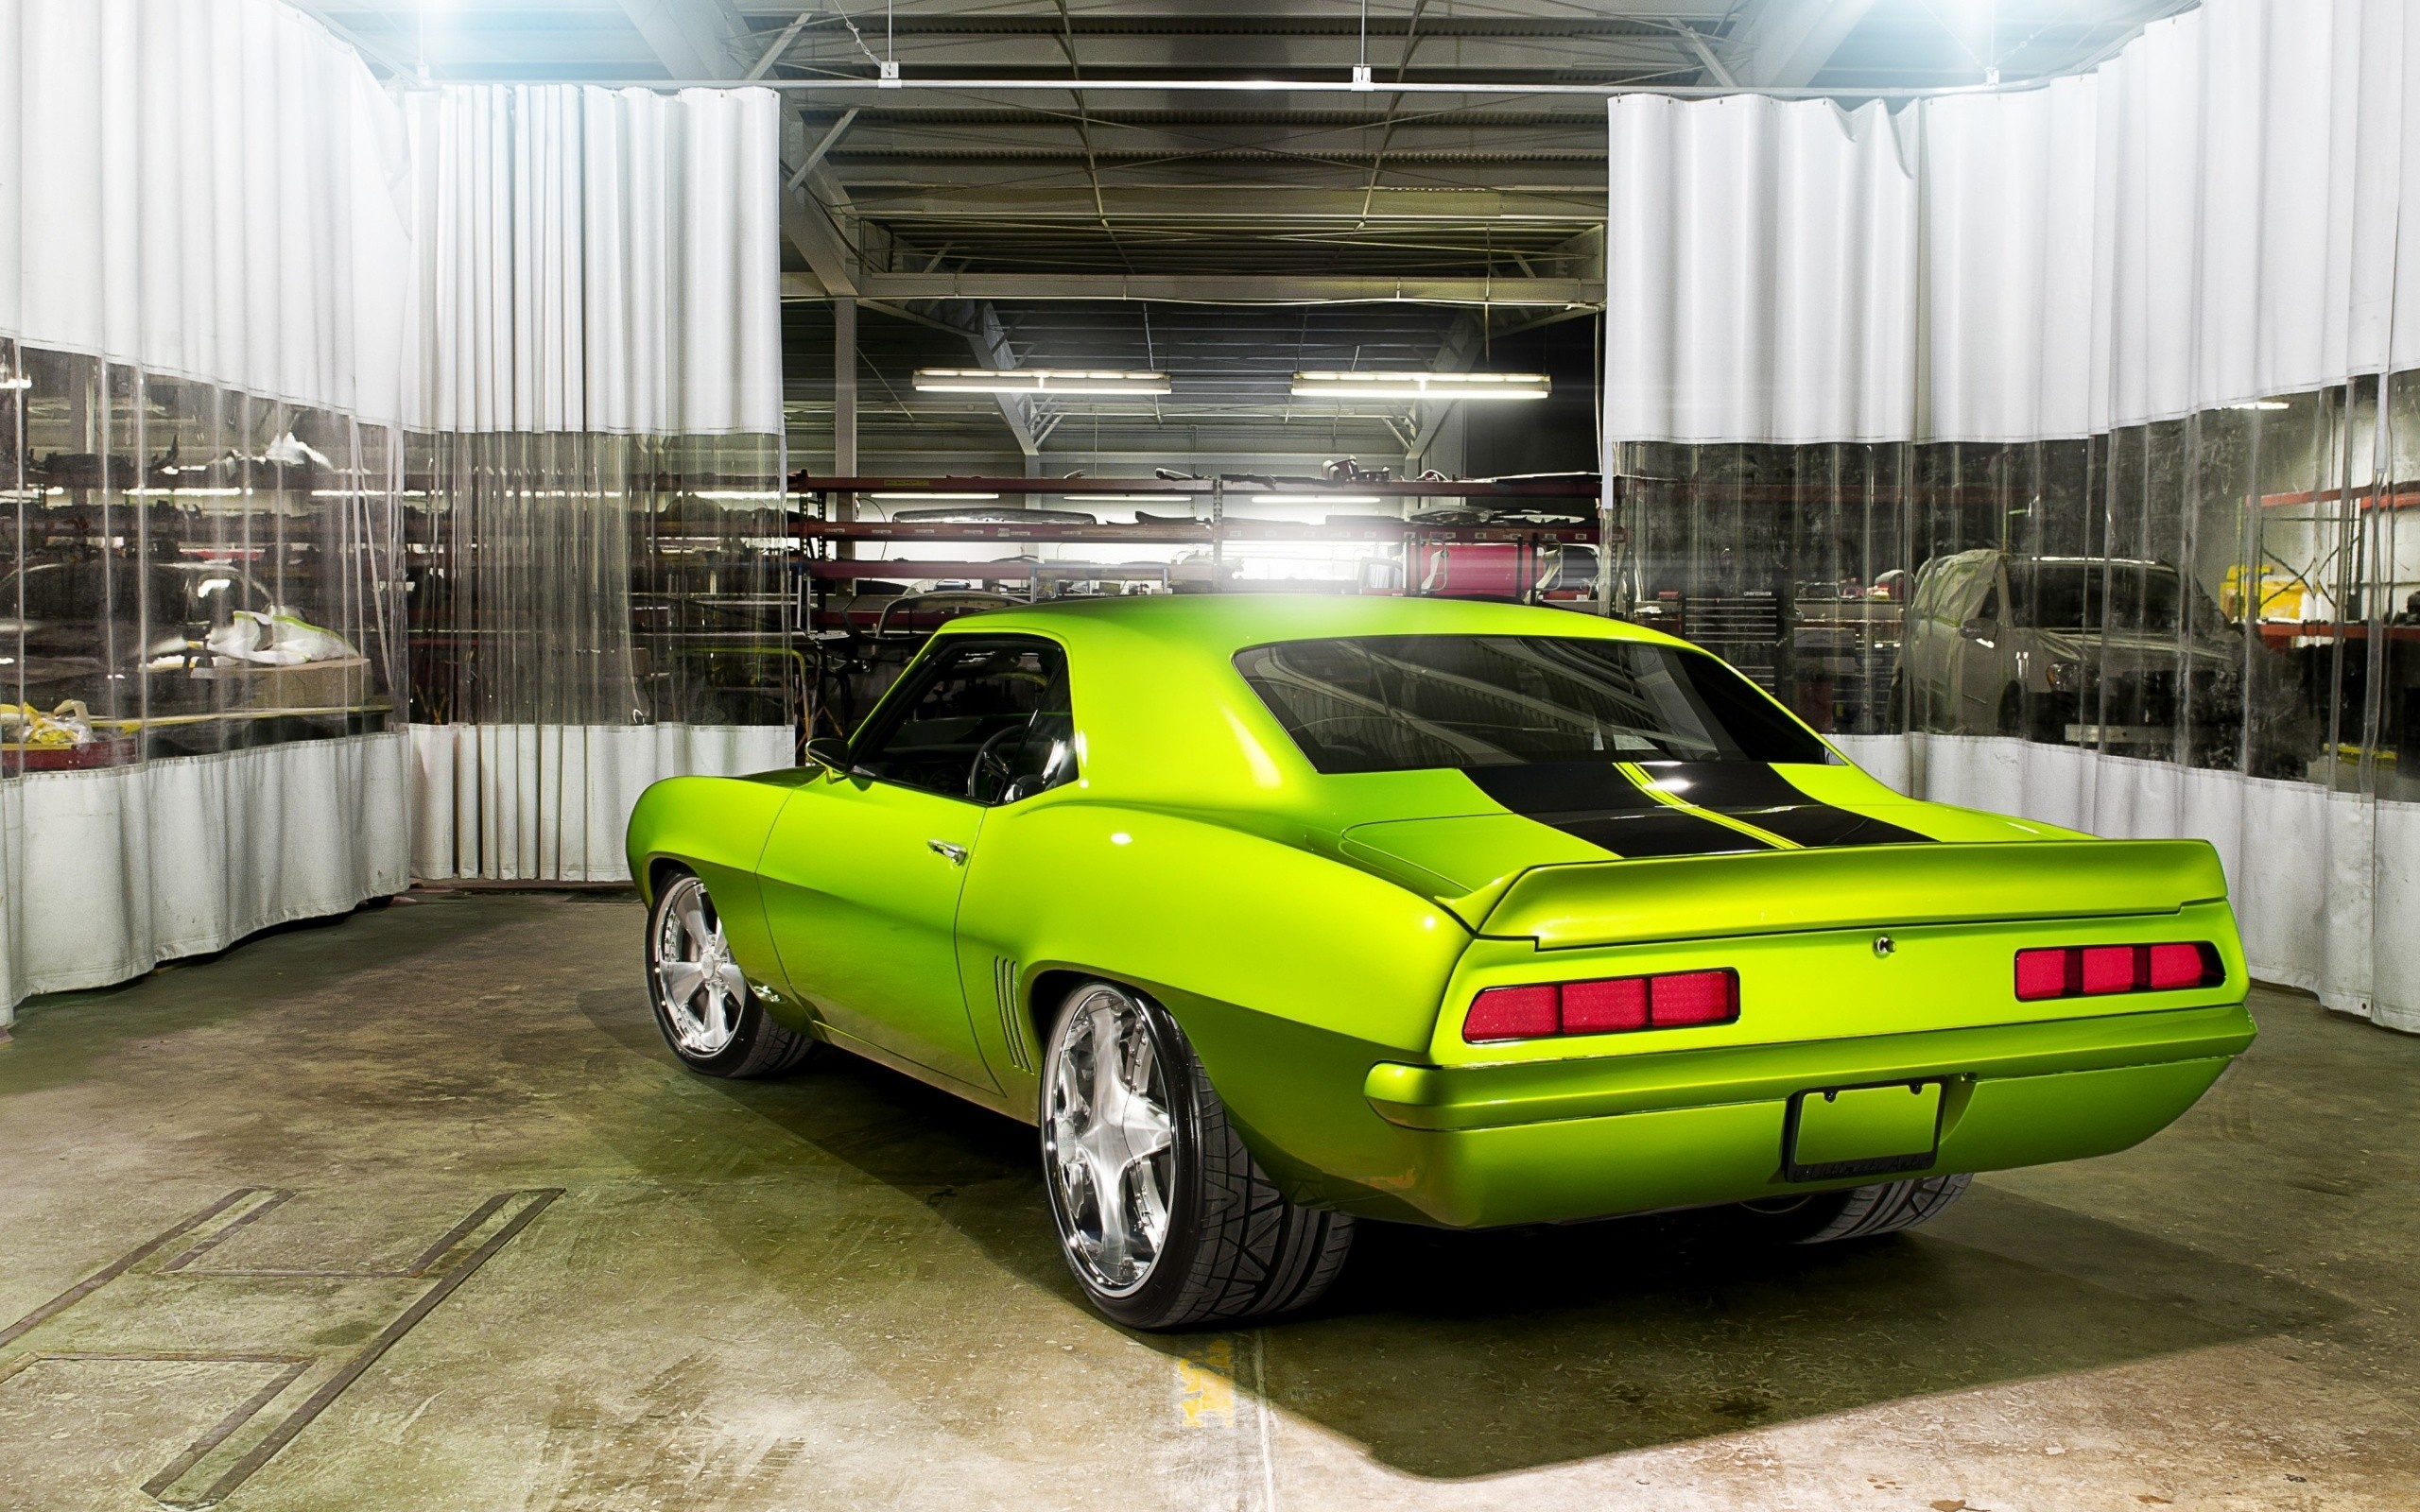 General 2560x1600 car vehicle green cars Chevrolet Chevrolet Camaro muscle cars American cars